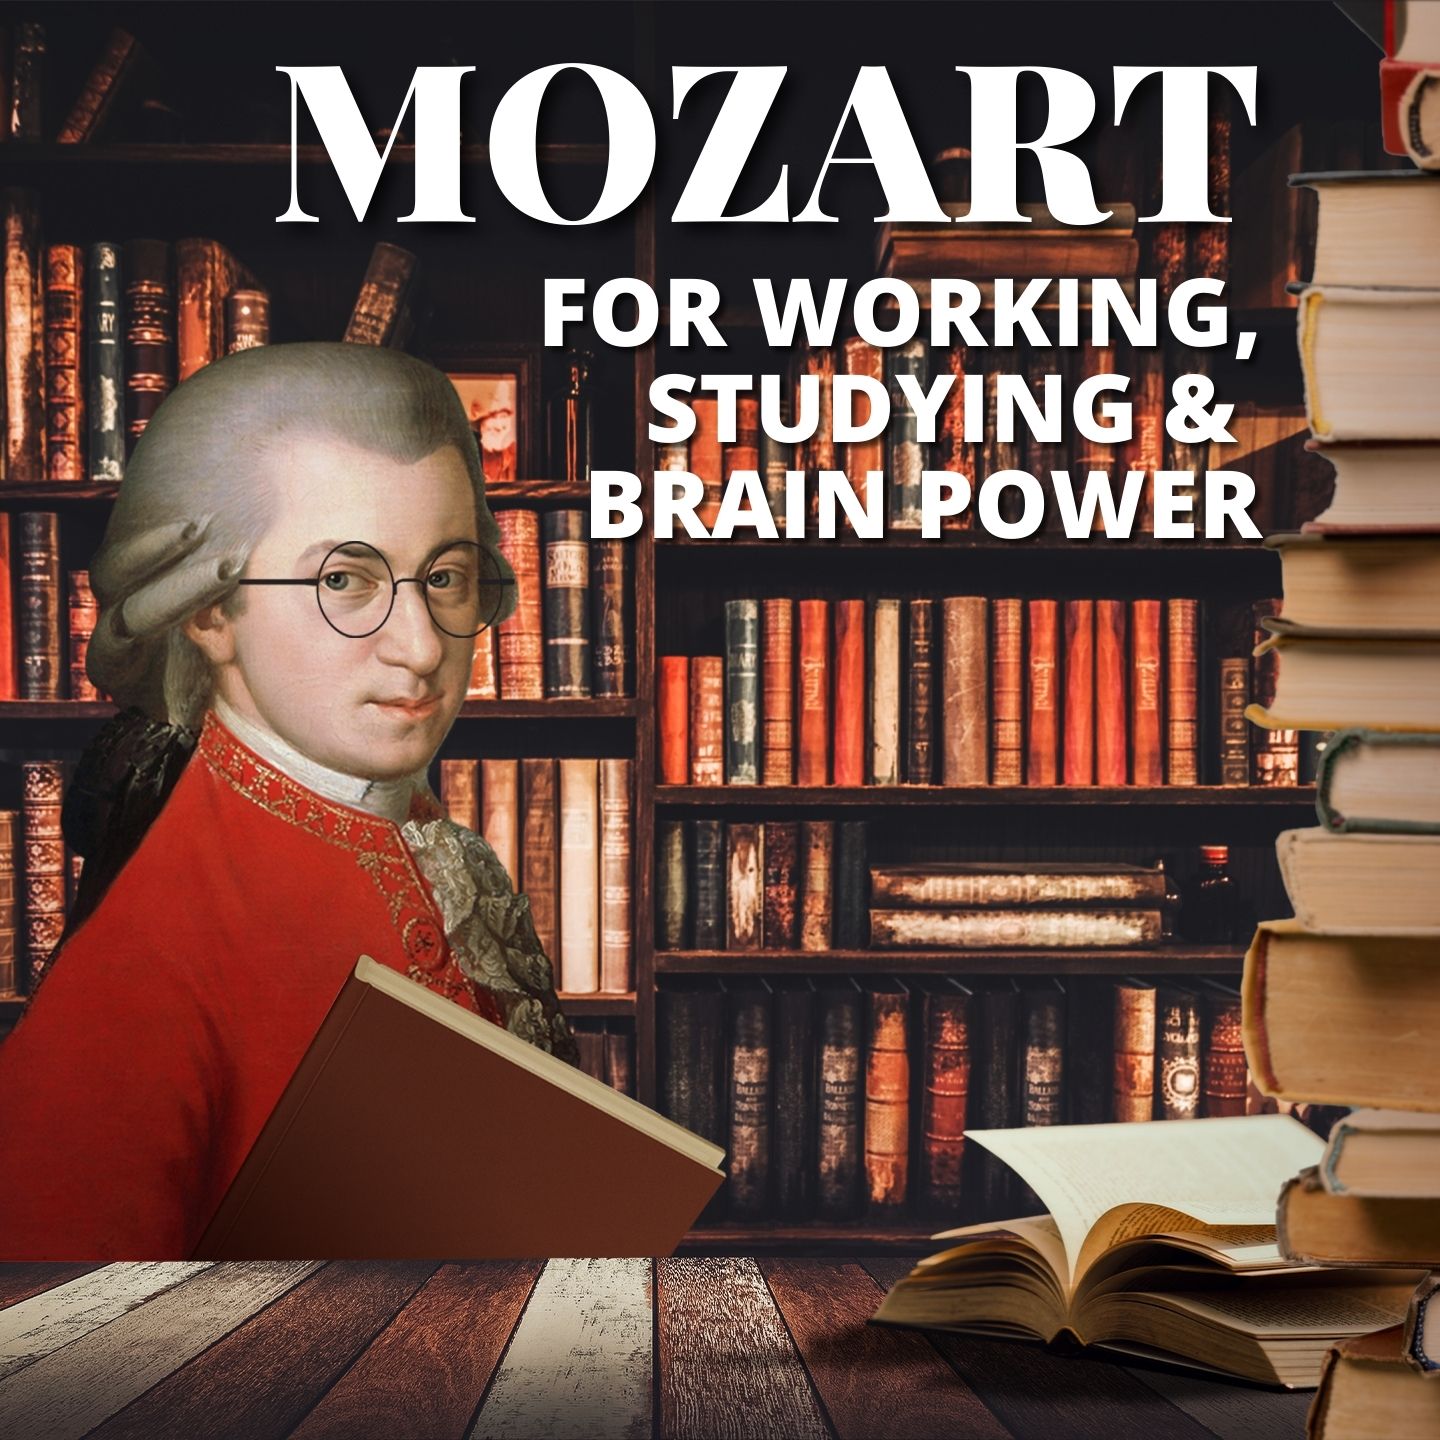 Mozart: Classical Music for Working, Studying & Brain Power